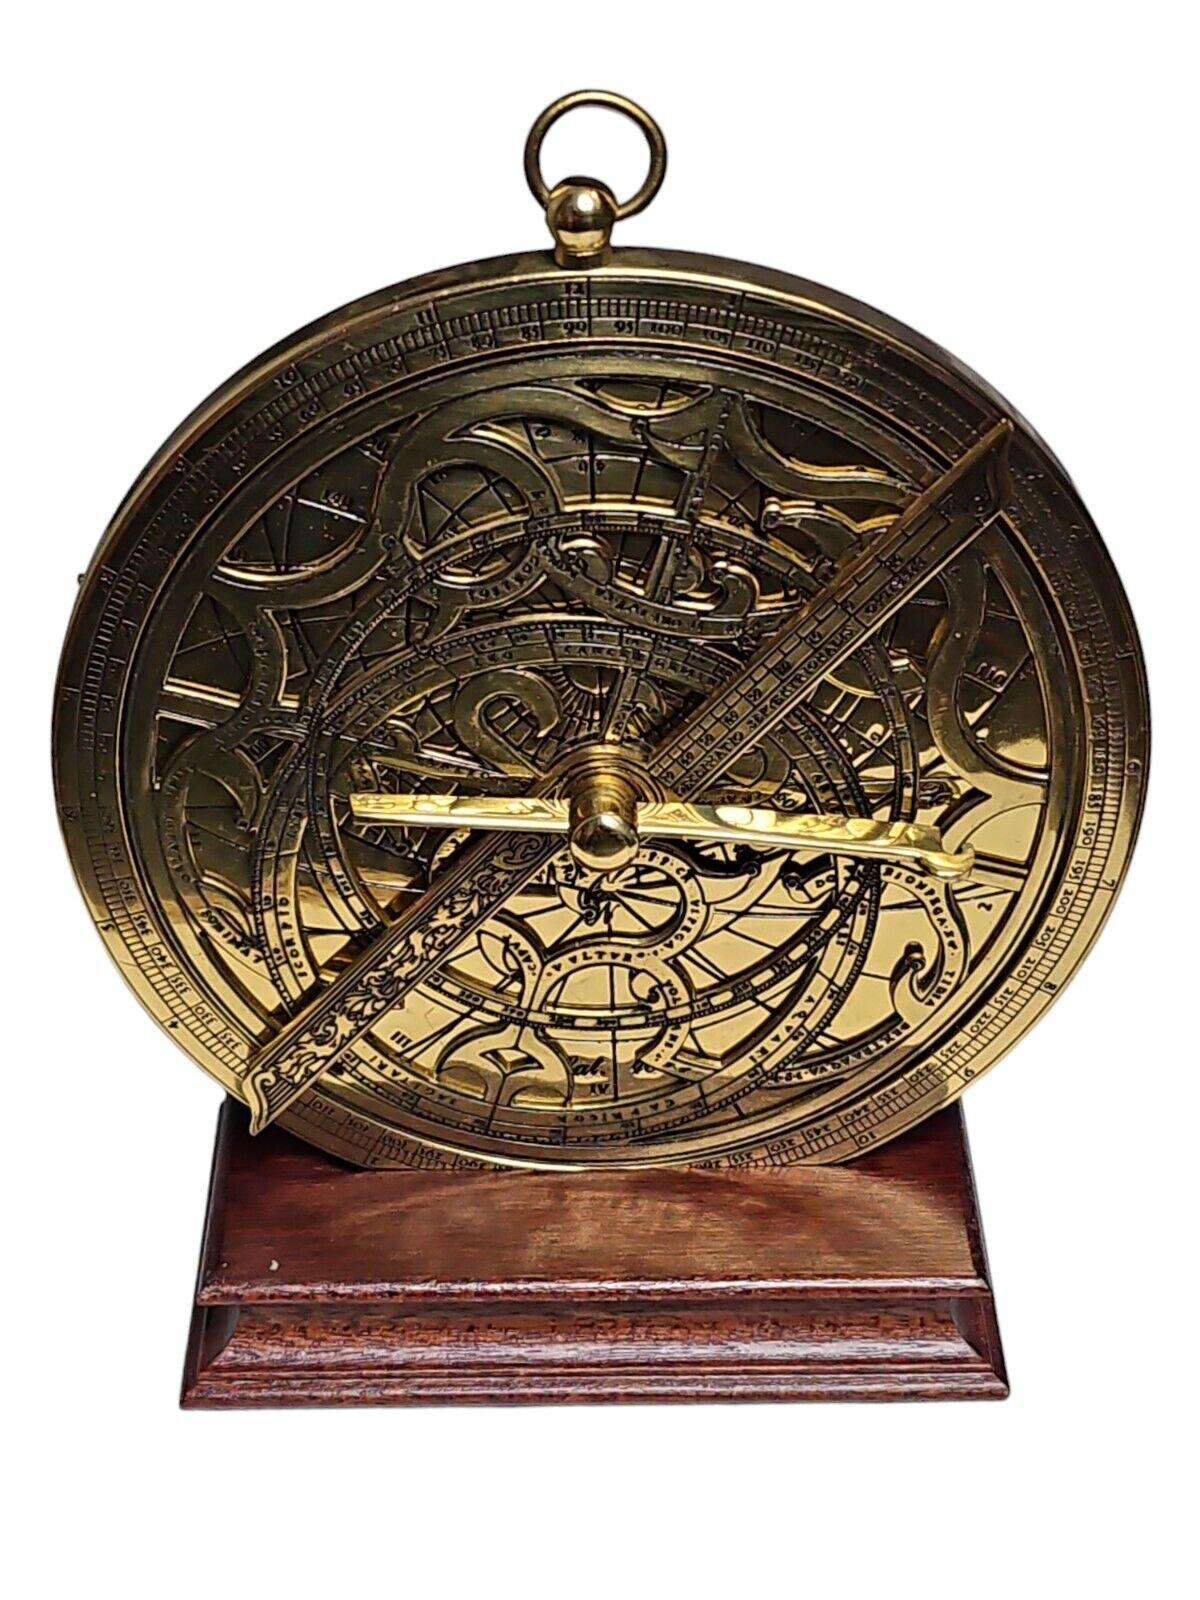 Franklin Mint The  Astrolabe The Great Instruments of Discovery 1987